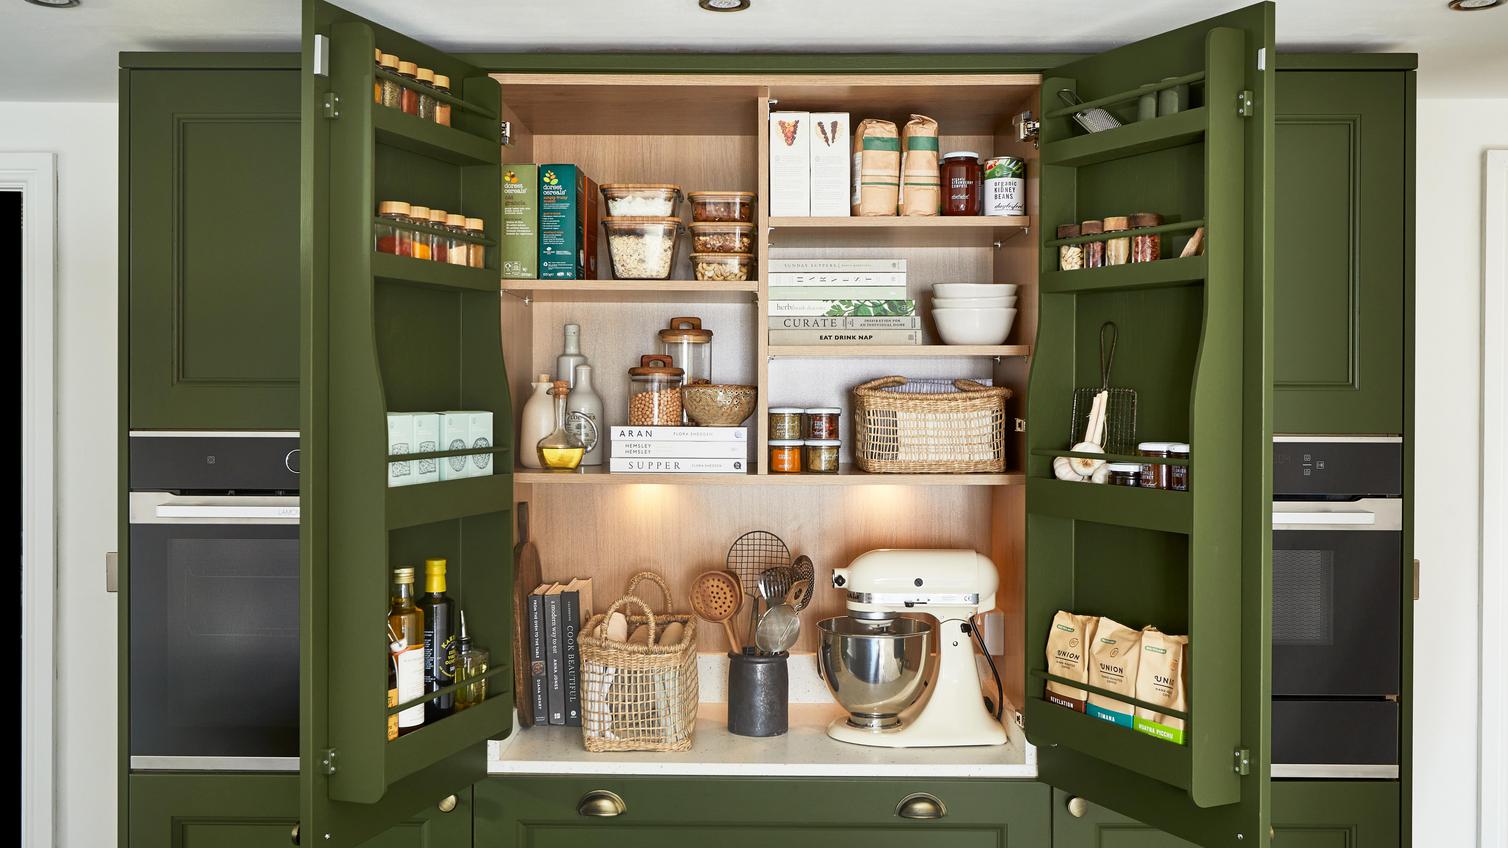 An olive green kitchen larder cabinet, which has matching door balconies for storage. Inside are oak-effect shelves.